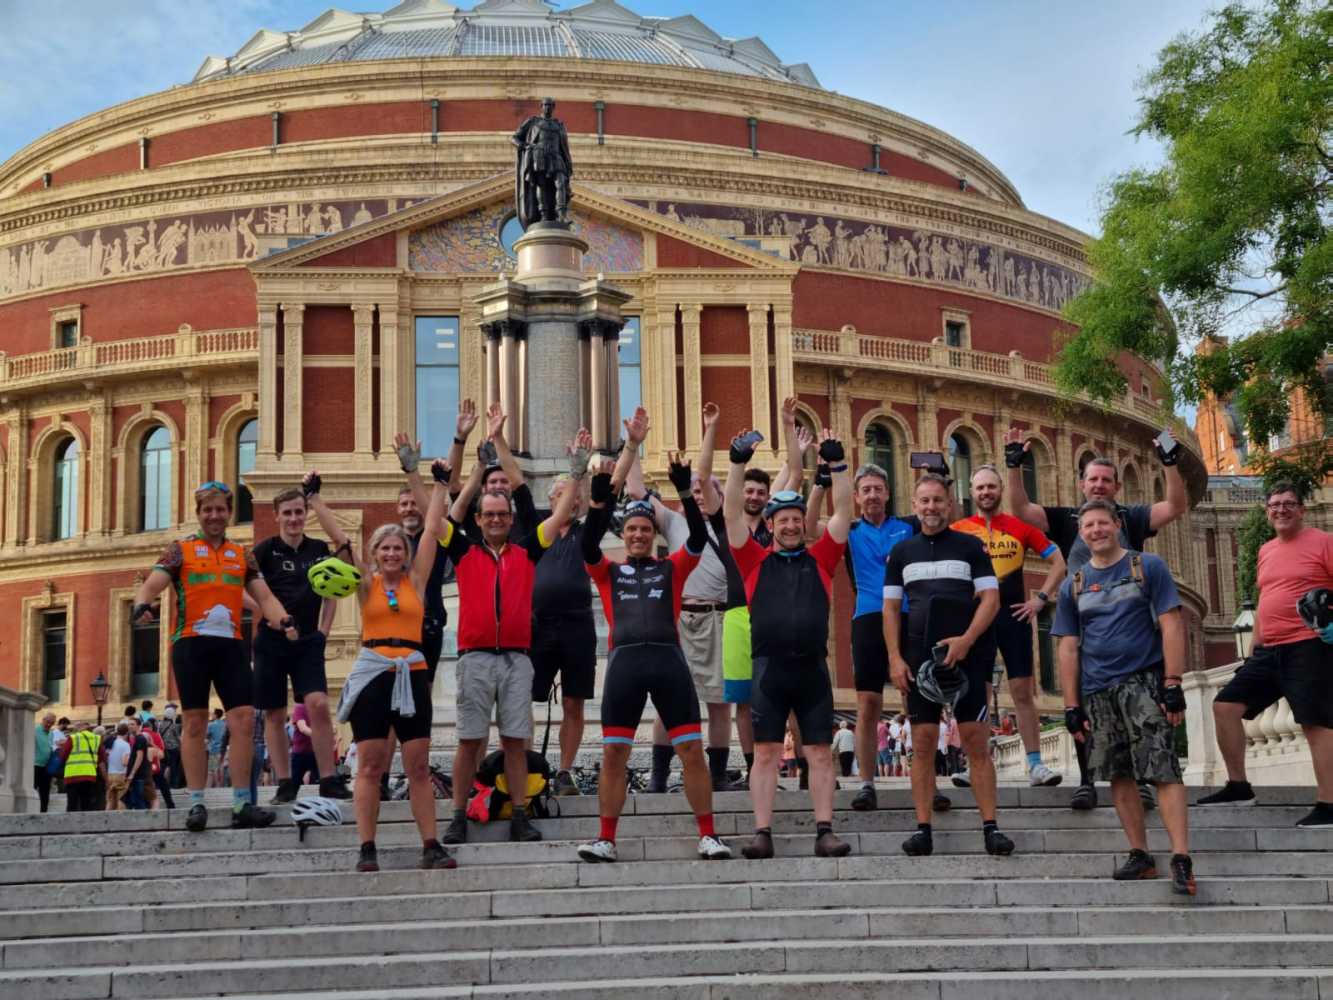 A team of approximately 20 cyclists braved the journey, representing some of the biggest names in the entertainment technology industry